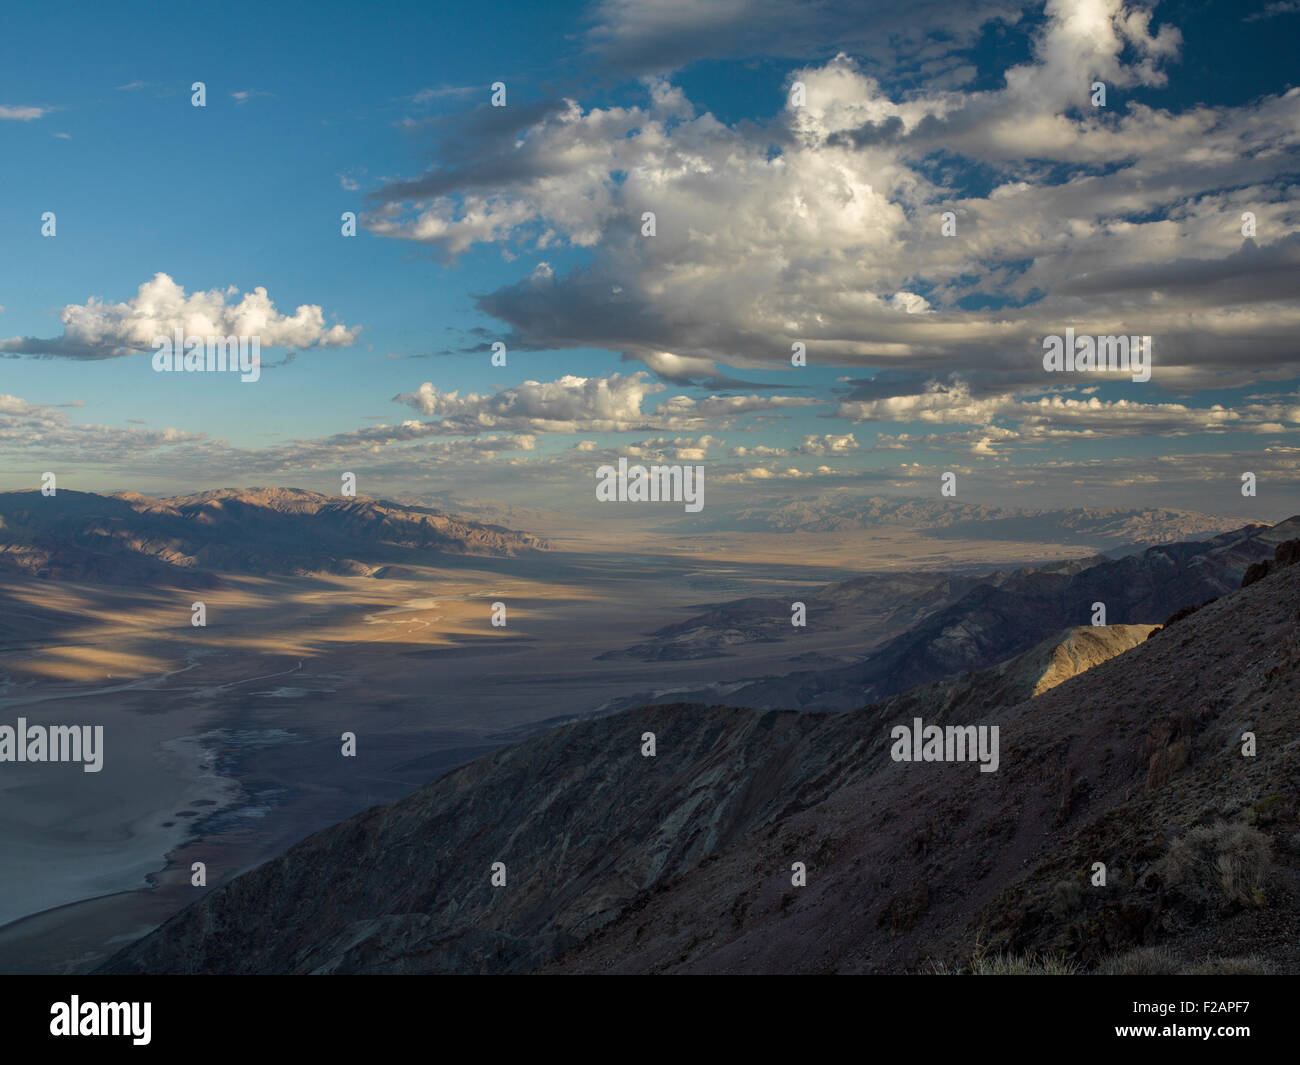 Death Valley as seen from Dantes View looking down towards Badwater Basin Stock Photo